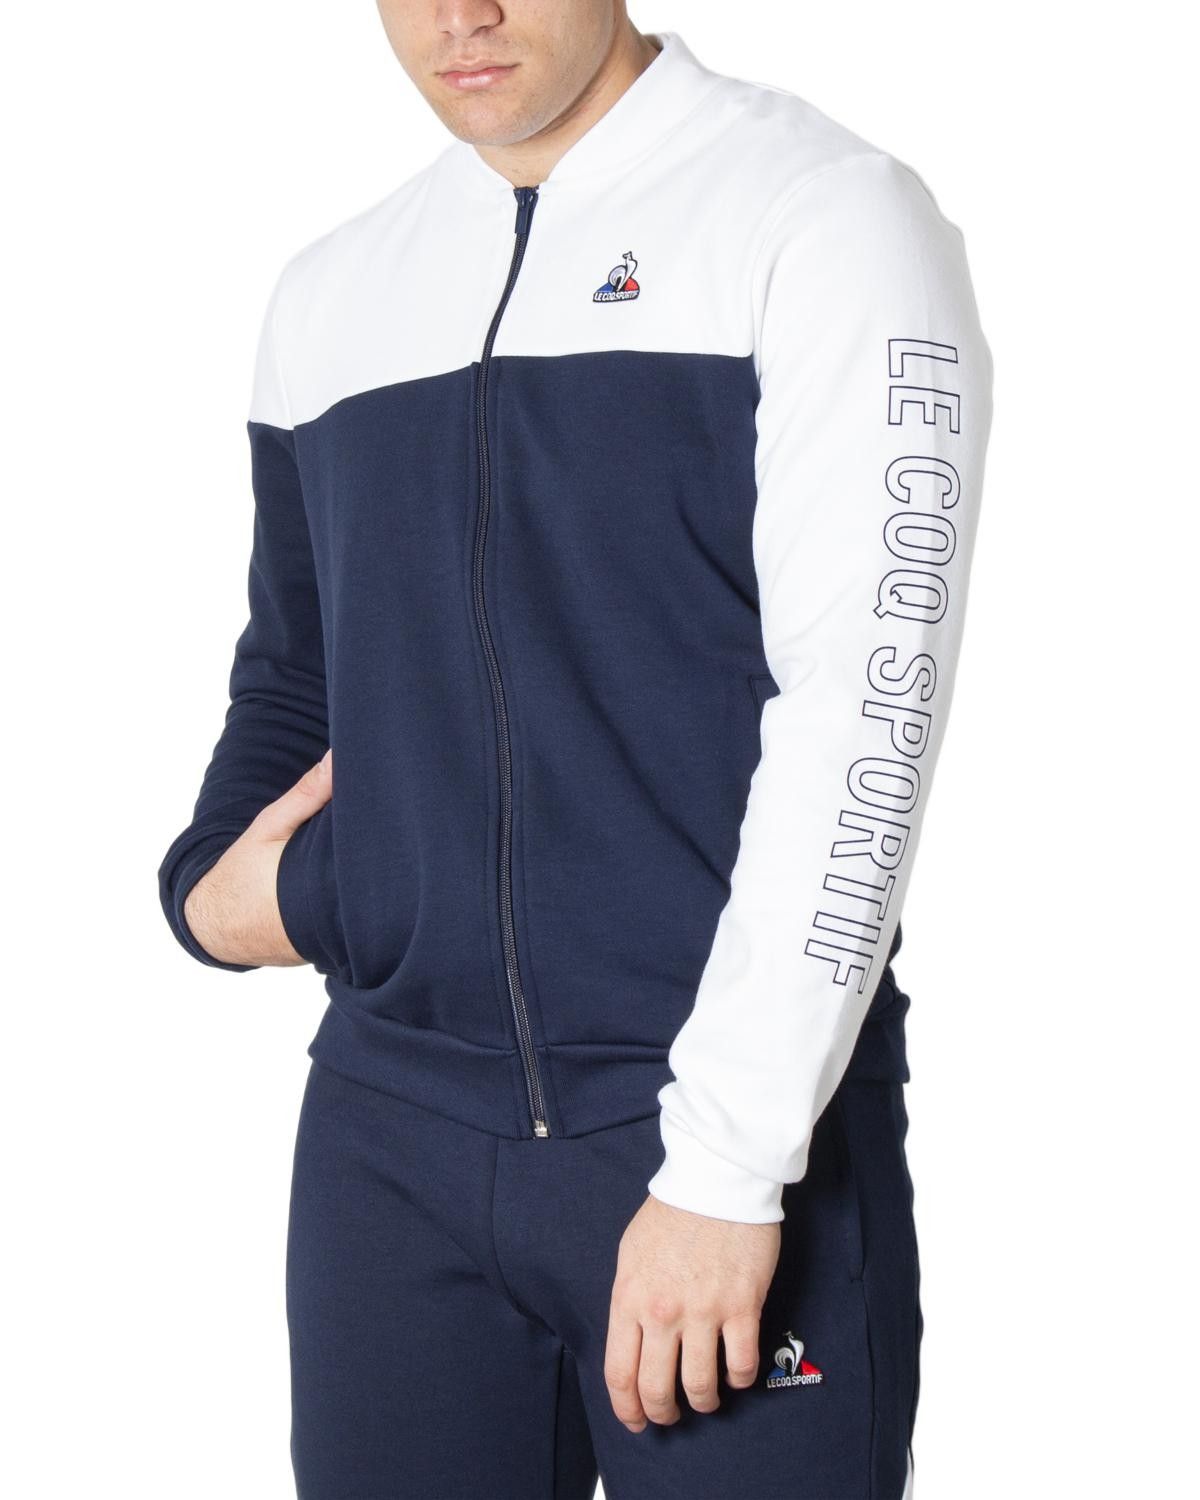 Brand: Le Coq Sportif Gender: Men Type: Sweatshirts Season: Spring/Summer  PRODUCT DETAIL • Color: blue • Pattern: print • Fastening: with zip • Sleeves: long • Neckline: turtleneck • Pockets: front pockets  COMPOSITION AND MATERIAL • Composition: -85% cotton -15% polyester  •  Washing: machine wash at 30° -85% Cotton -15% Polyester